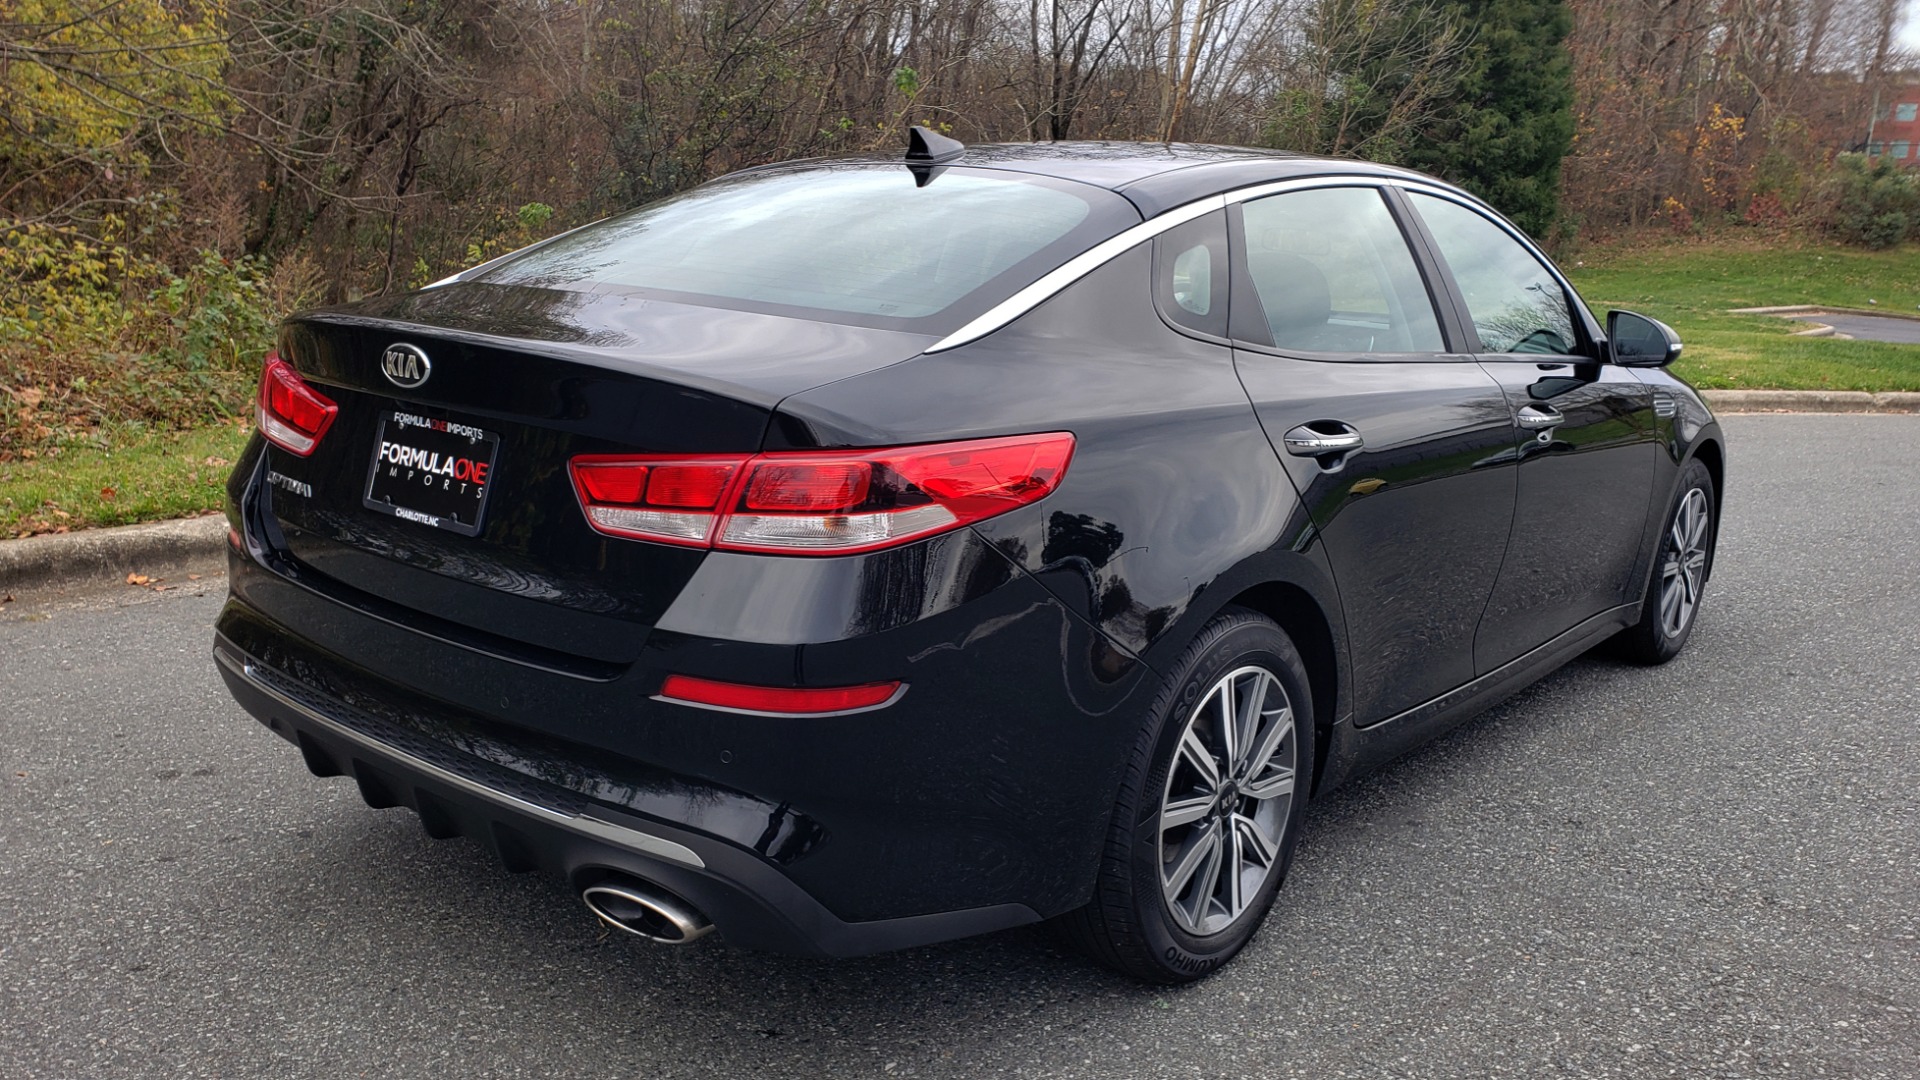 Used 2019 Kia OPTIMA LX AUTO / 2.4L 4-CYL / 6-SPD AUTO / REARVIEW / LOW MILES for sale Sold at Formula Imports in Charlotte NC 28227 6